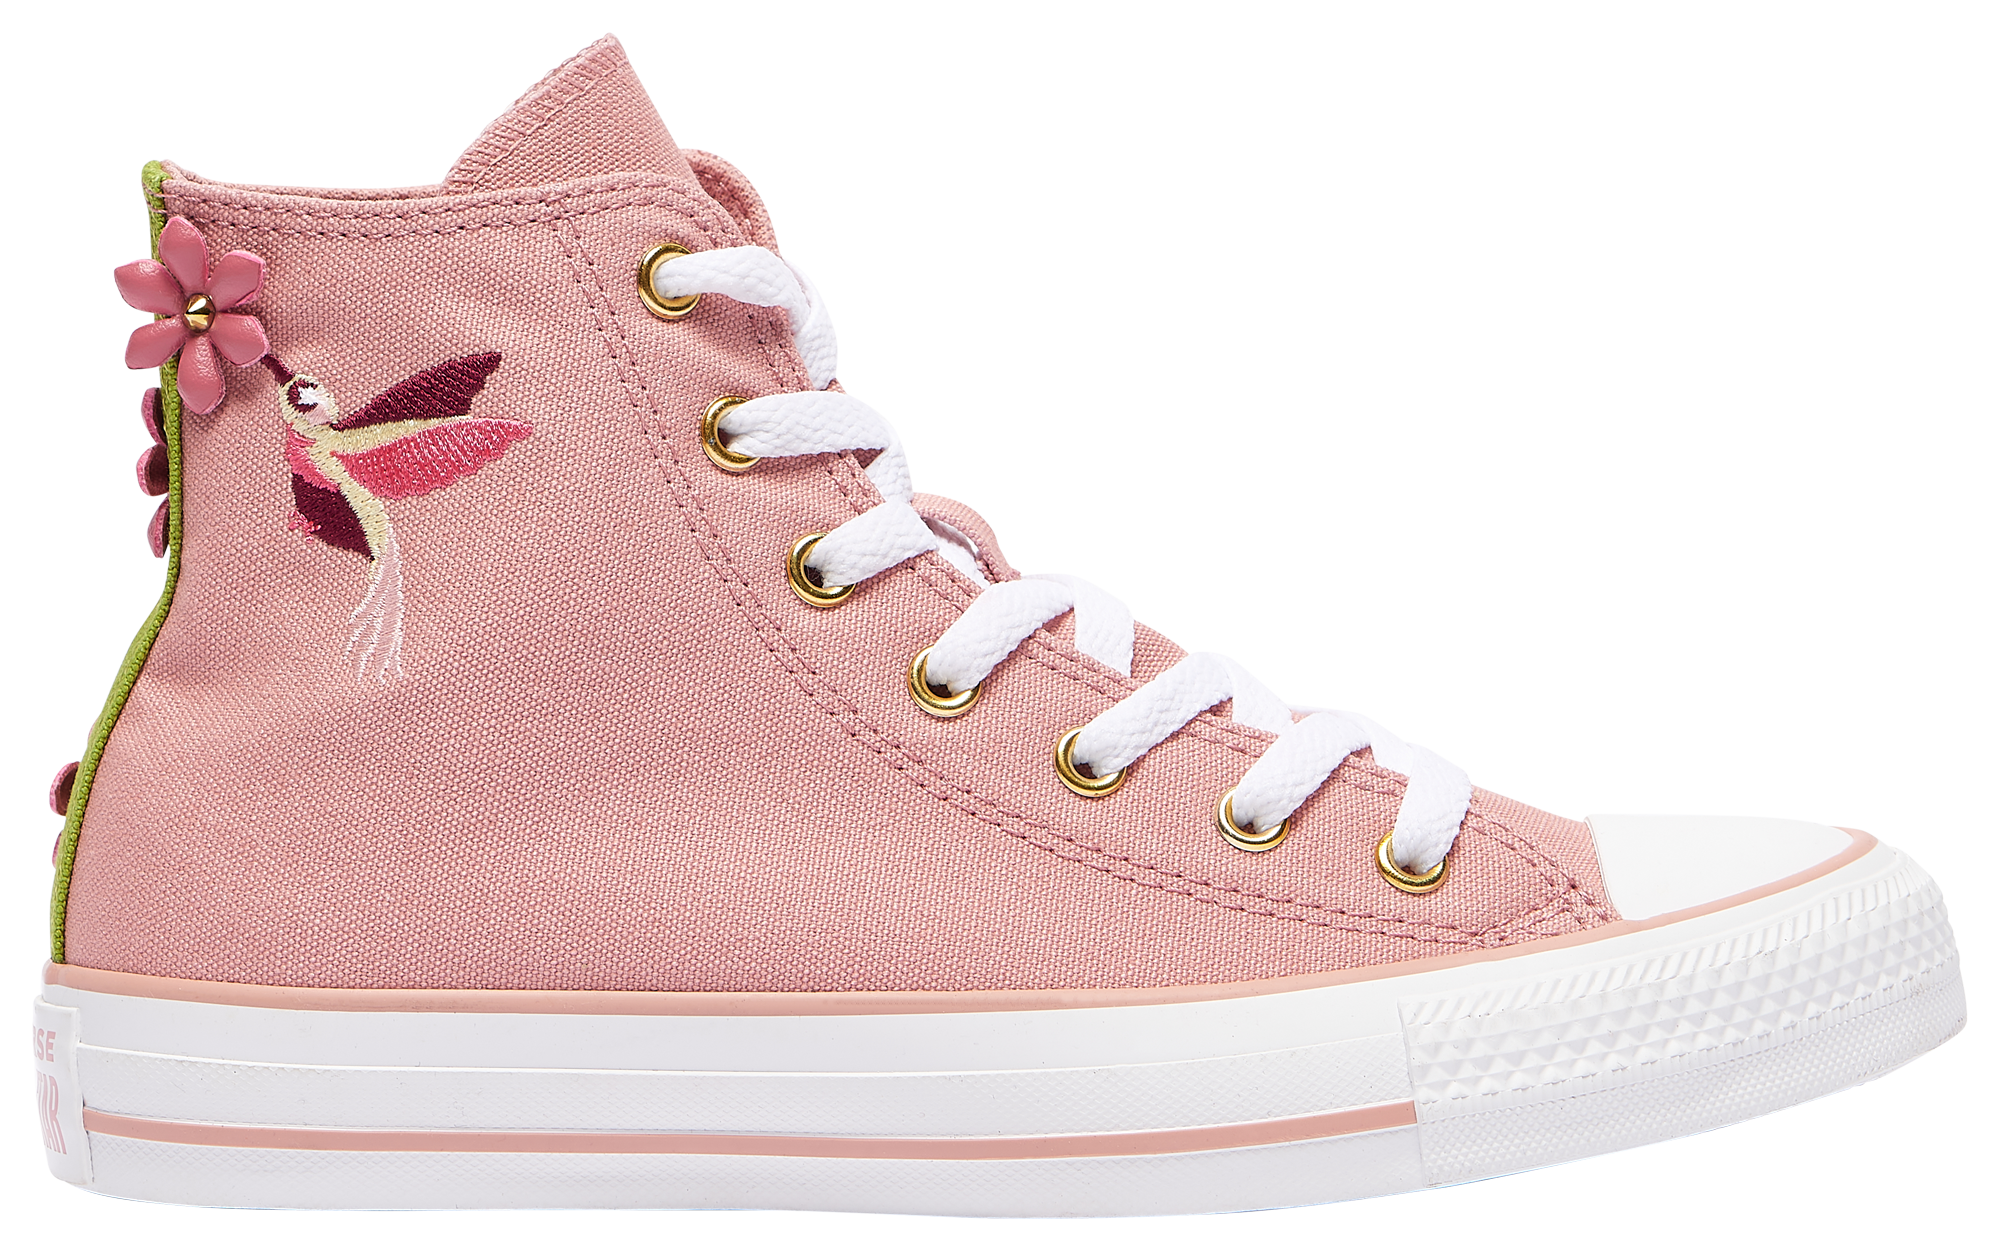 Converse Chuck Taylor All Star 1970 Hi's Desert Rose Available Now –  Feature